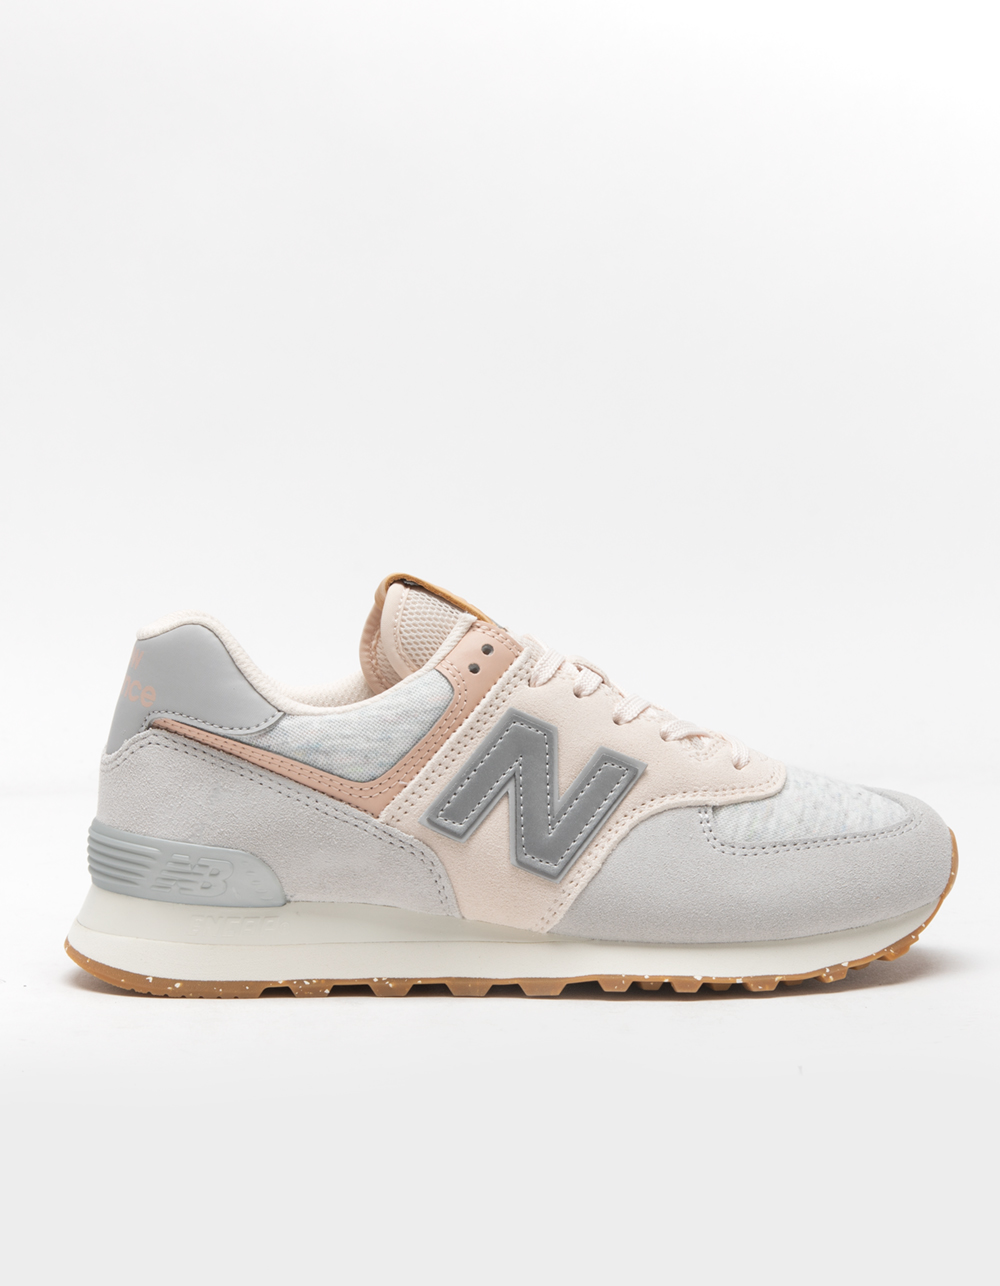 NEW BALANCE 574 Womens Shoes - GRAY | Tillys